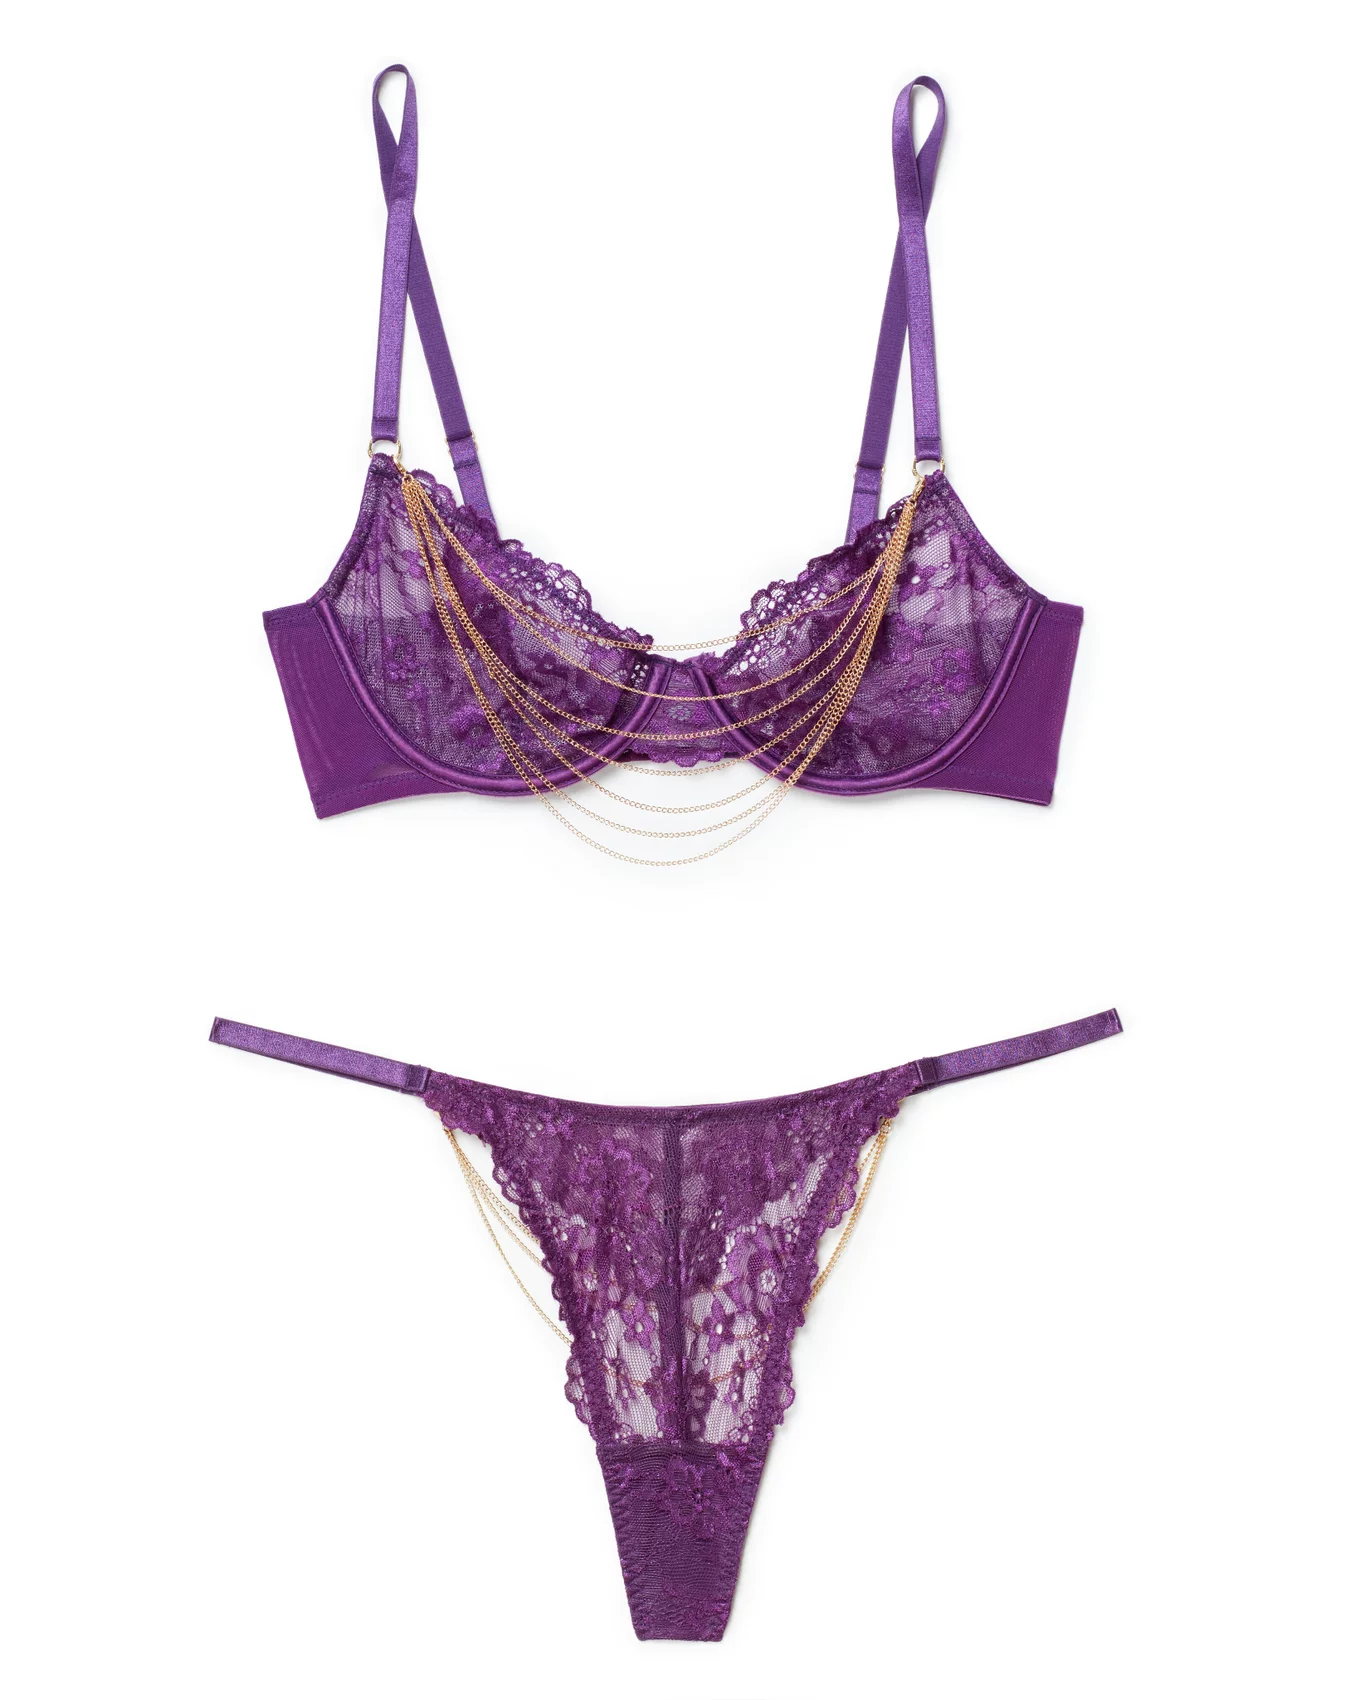 Adore Me Purple Lace Detail Bra Size 30B NWT - $29 New With Tags - From Cady